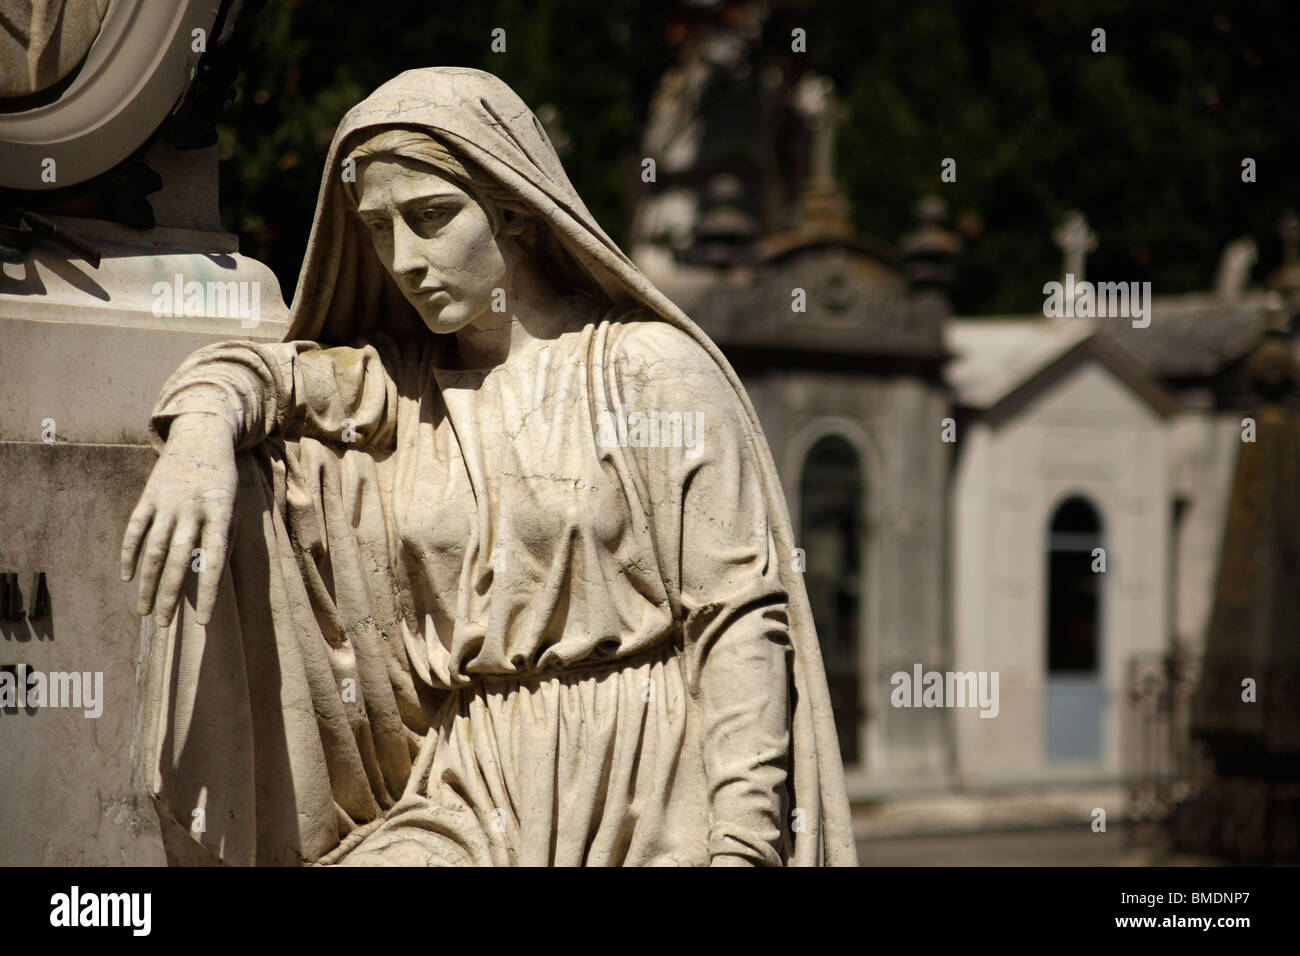 statue of a Mourning woman on a grave at Prazeres Cemetery in Lisbon, Portugal, Europe Stock Photo